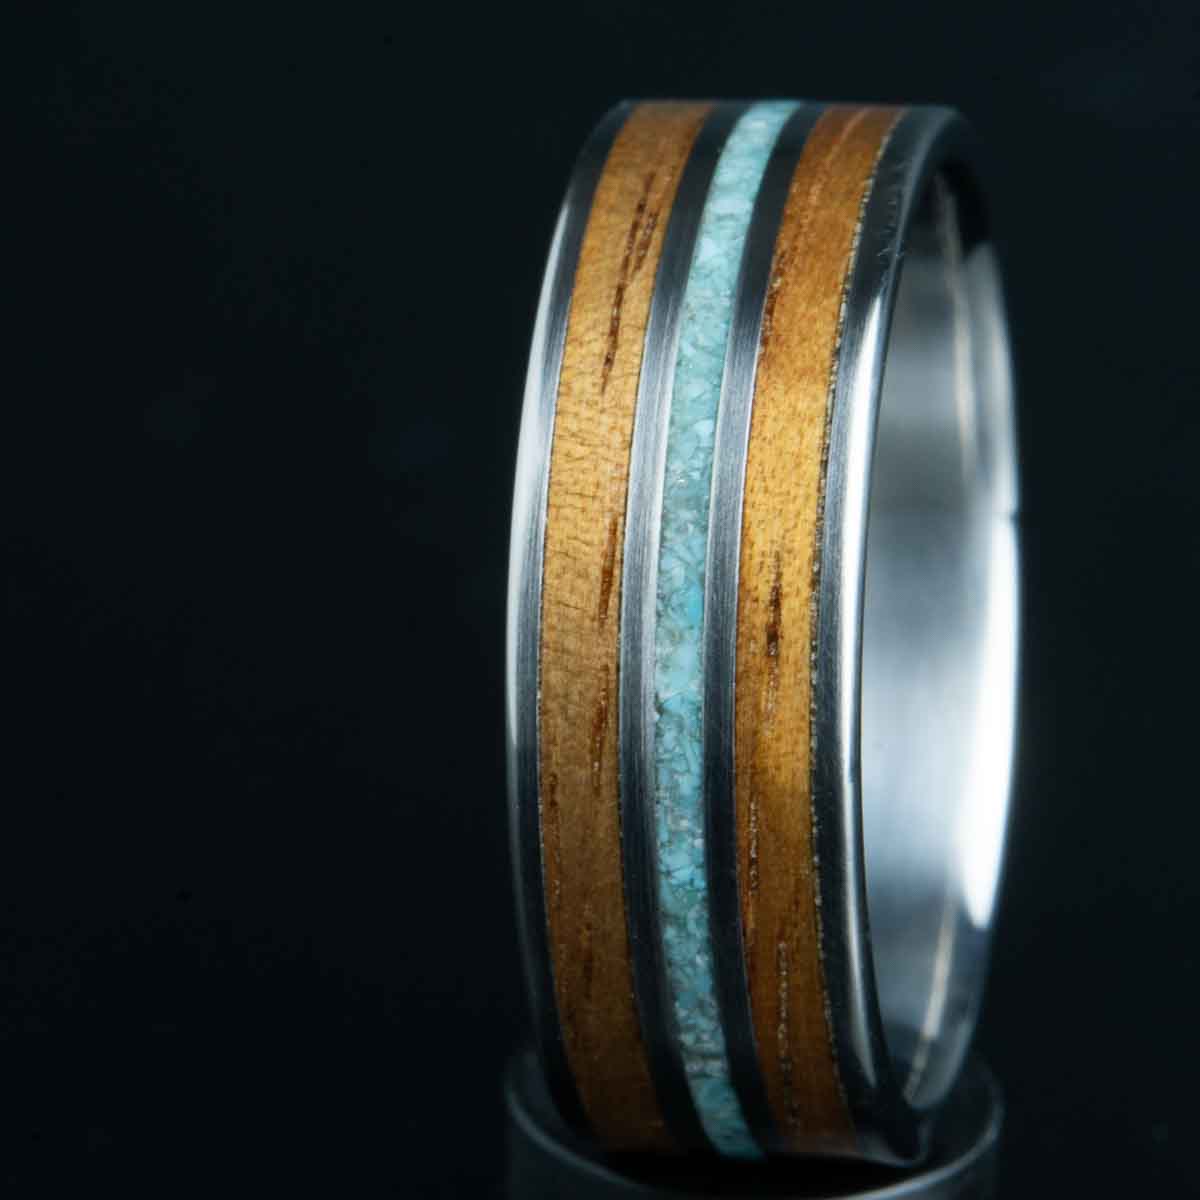 Titanium wedding ring with turquoise and koa wood by Peacefield Titanium